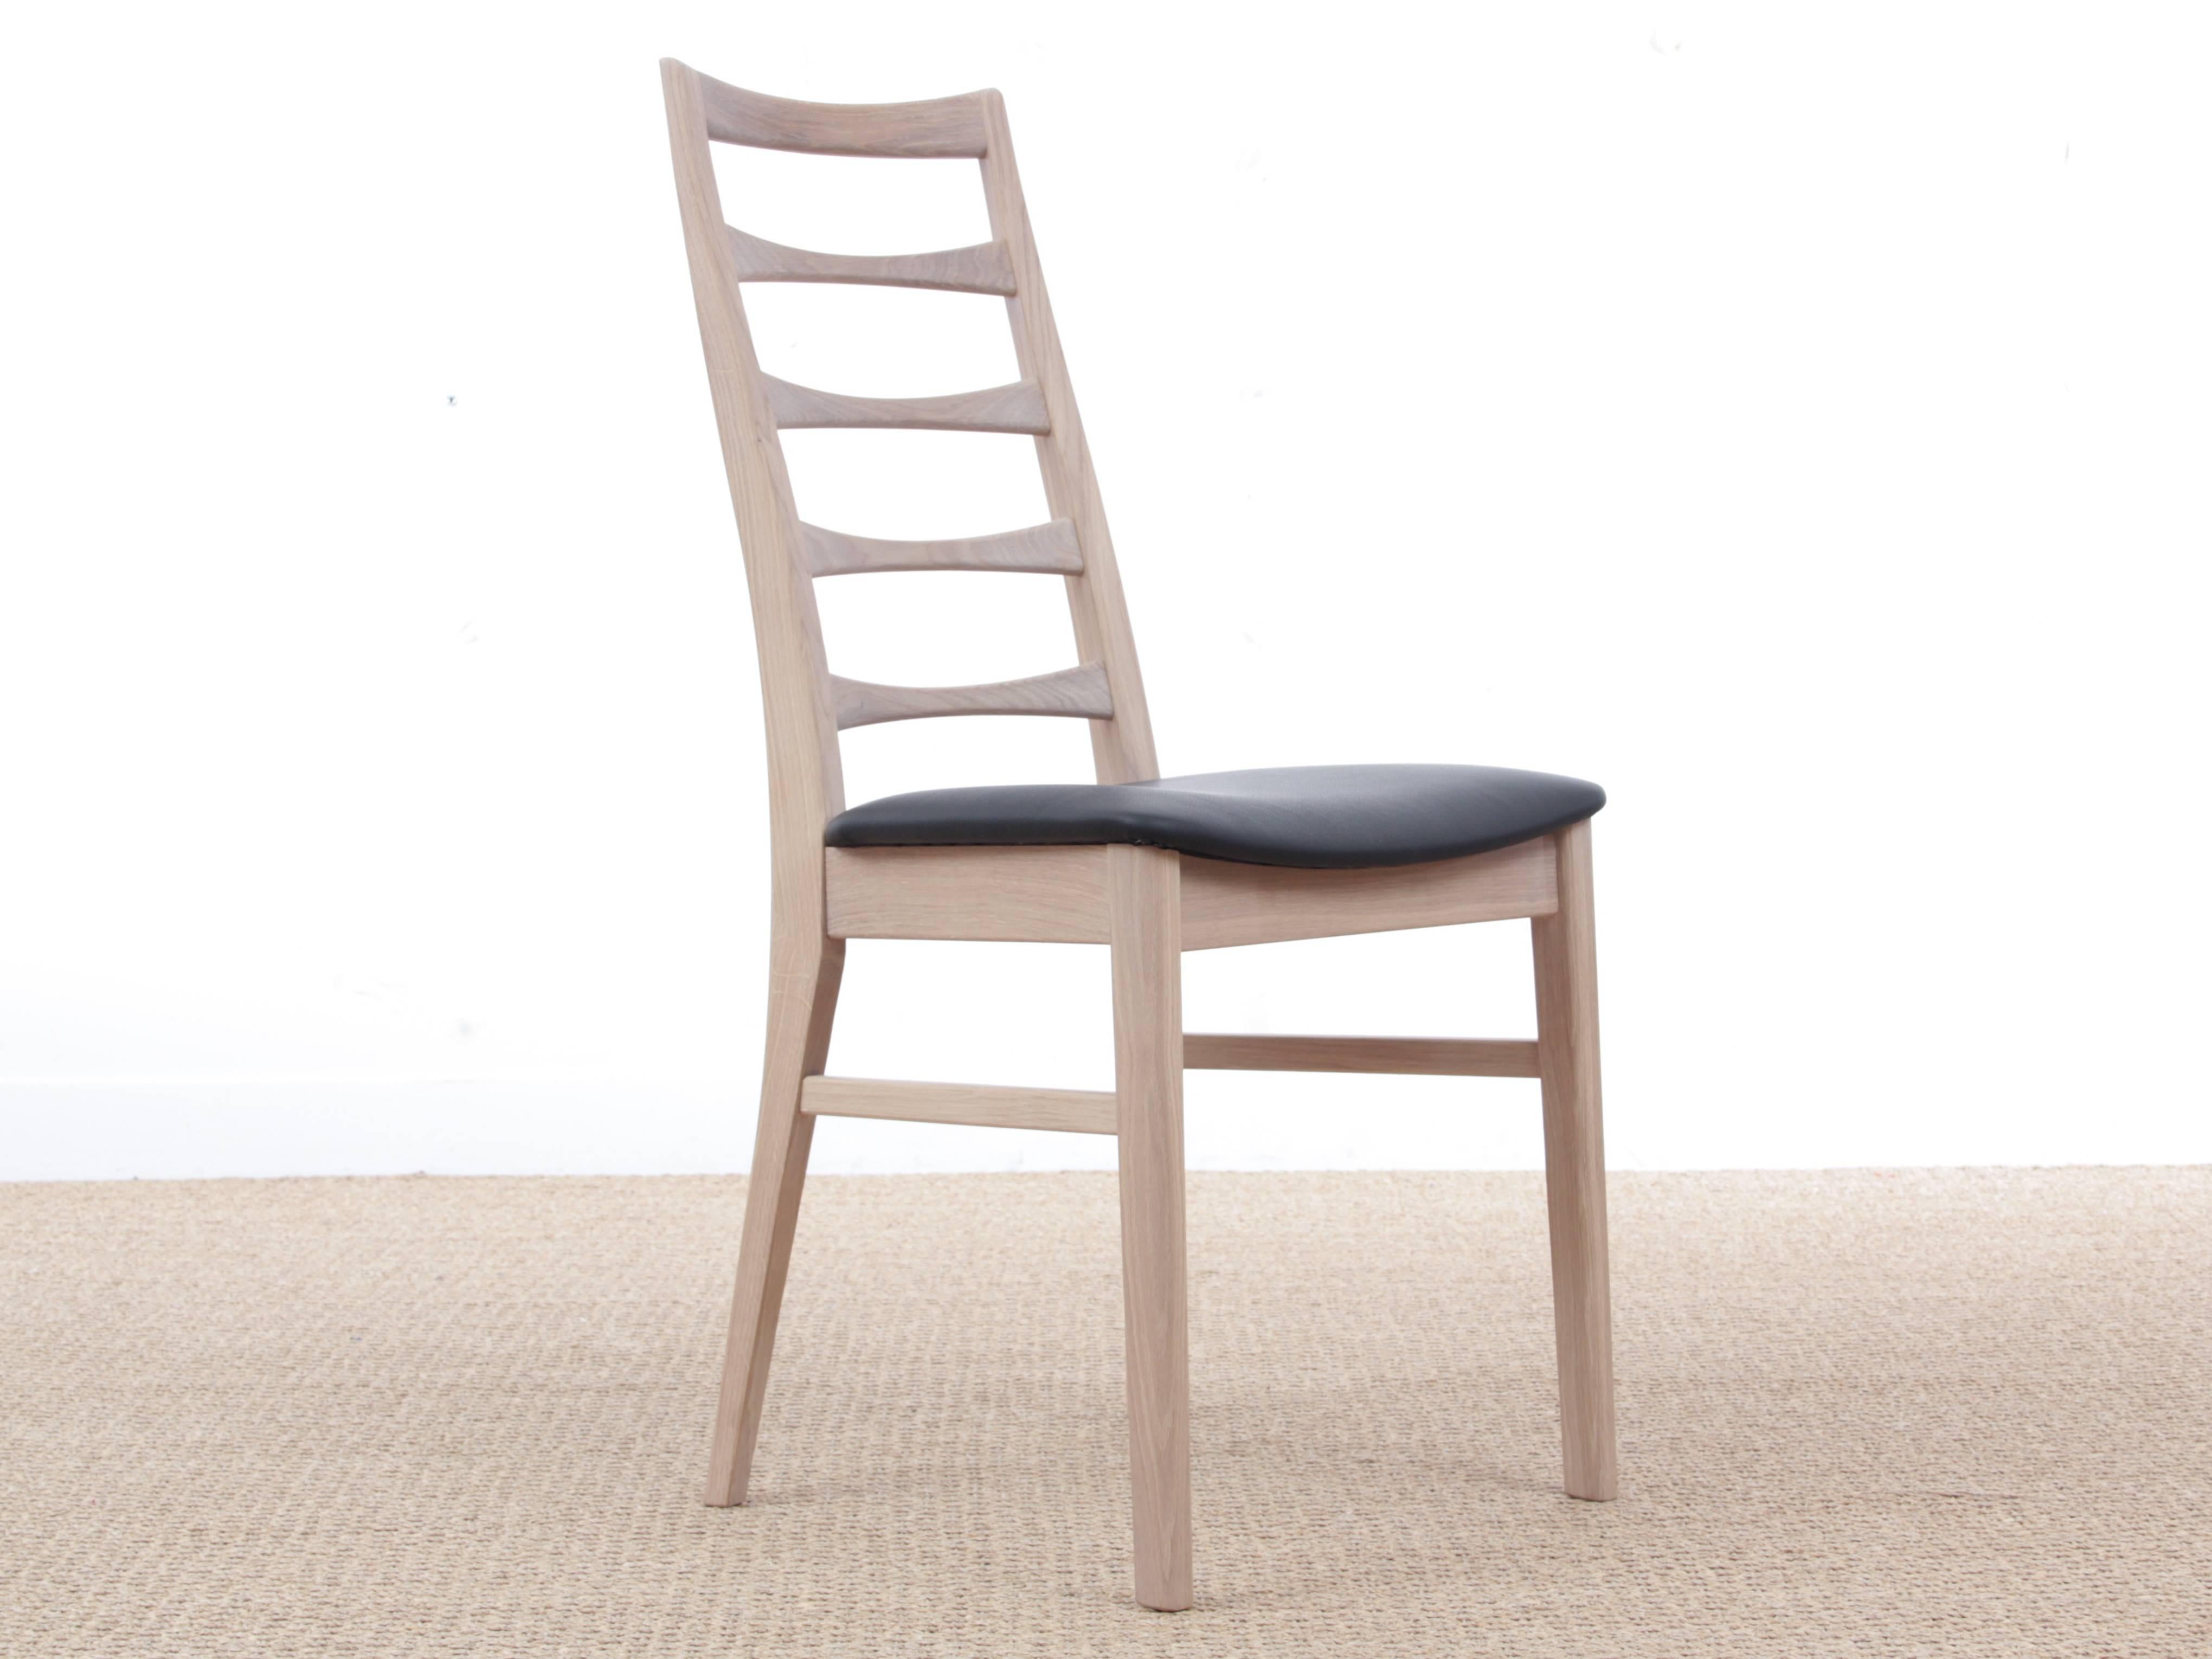 Mid-Century Modern Scandinavian dining chair model Liz by Niels Koefoed, new edition. Liz came to the world in 1961, but the years have not tarnished her - she is still a good seller.

